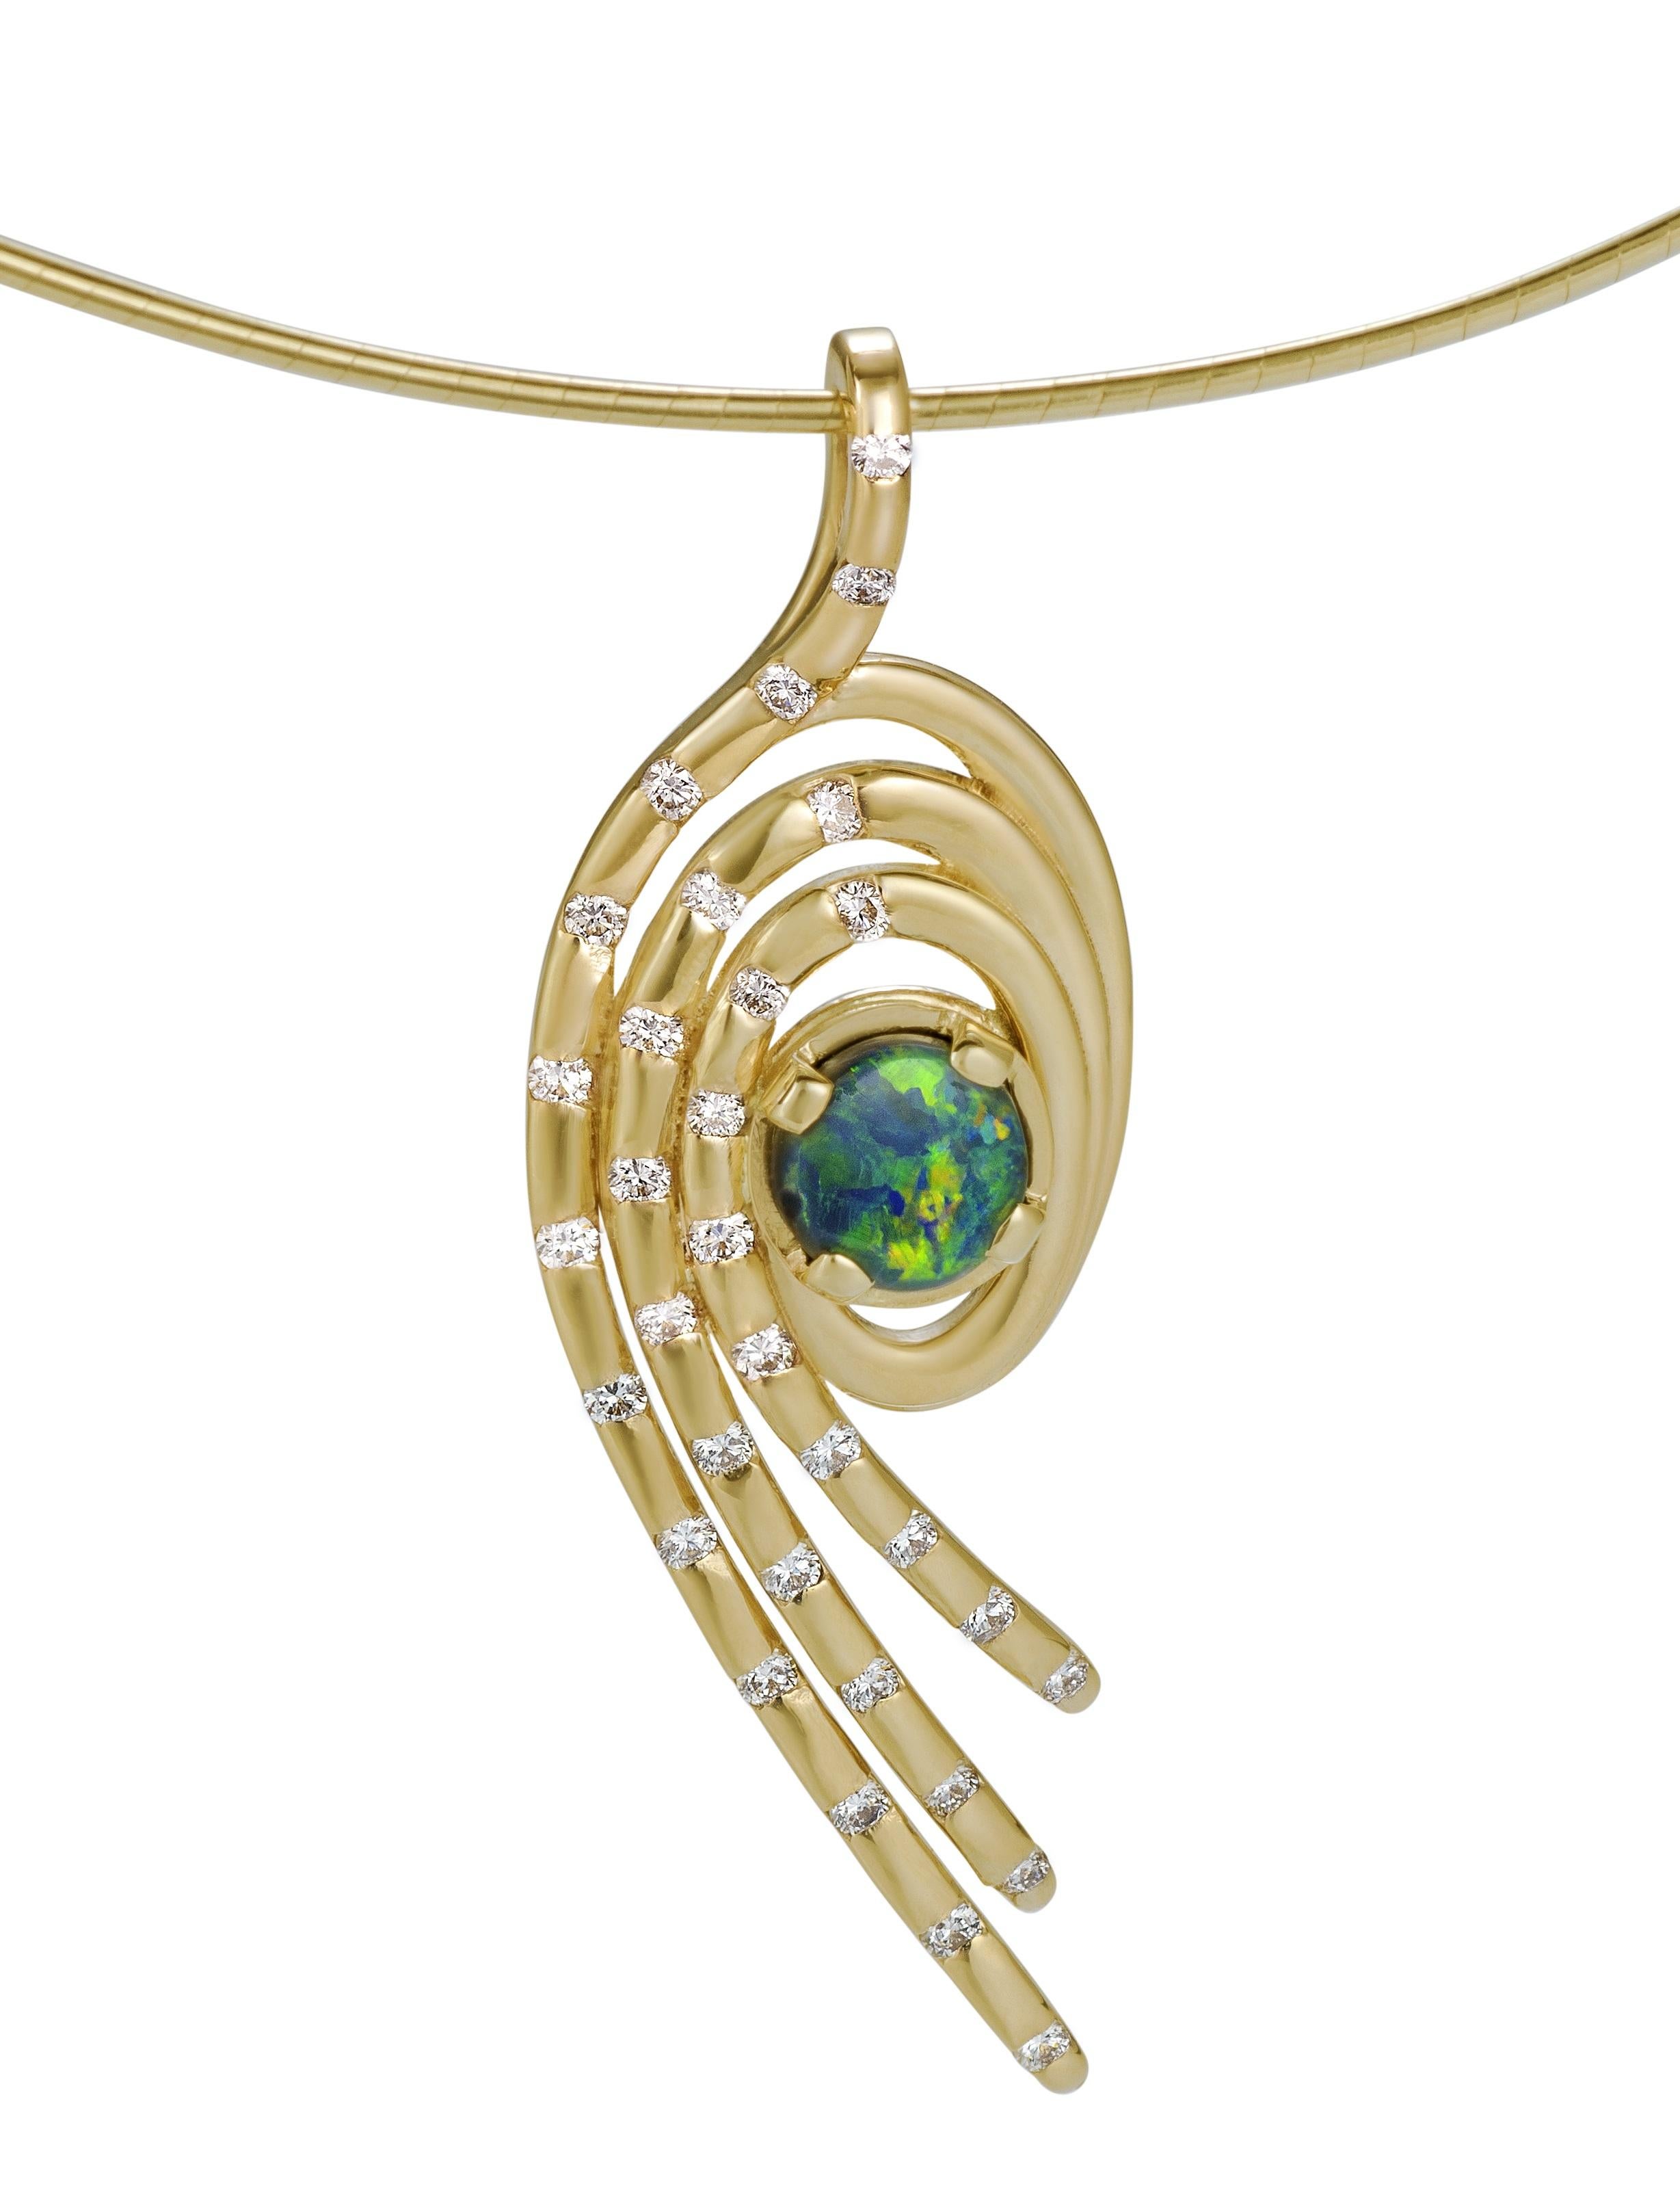 The Open Spiral Pendant necklace from the Nebula collection is made in 14ky. Each pendant is 1.75